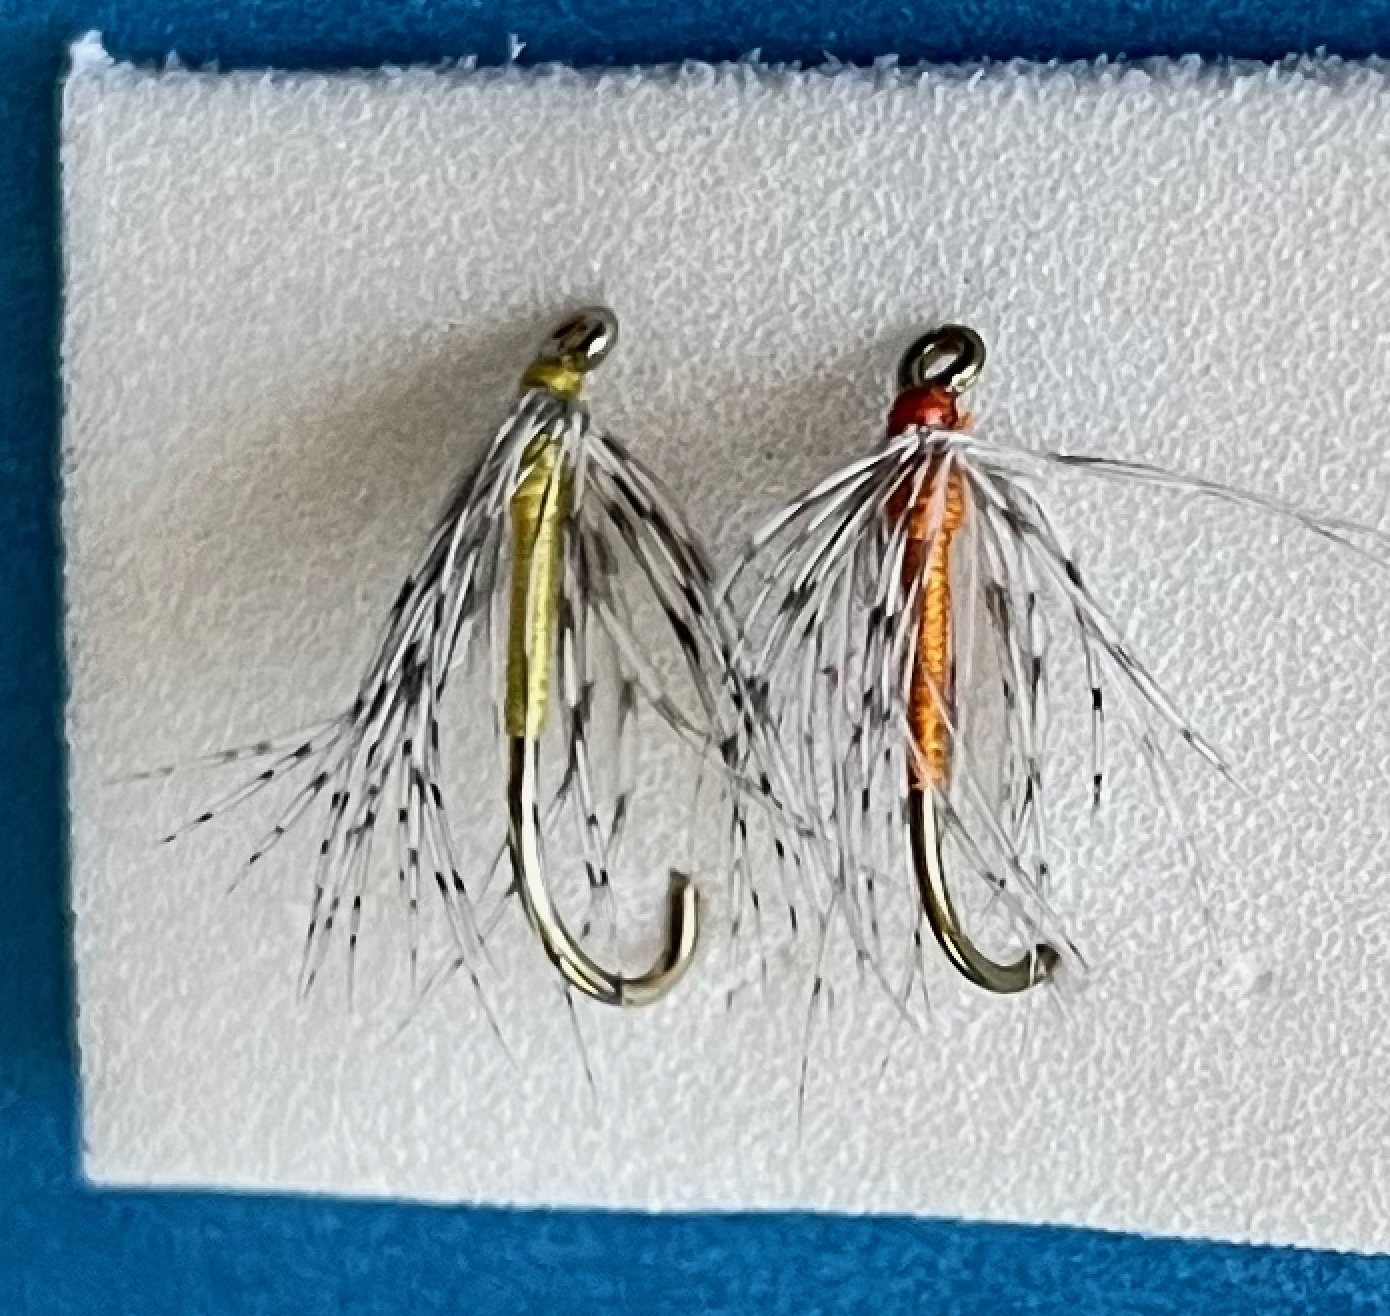 Finally got my size 20 nymph hooks in the mill to practice tying smaller.  Here's my first one! : r/flytying